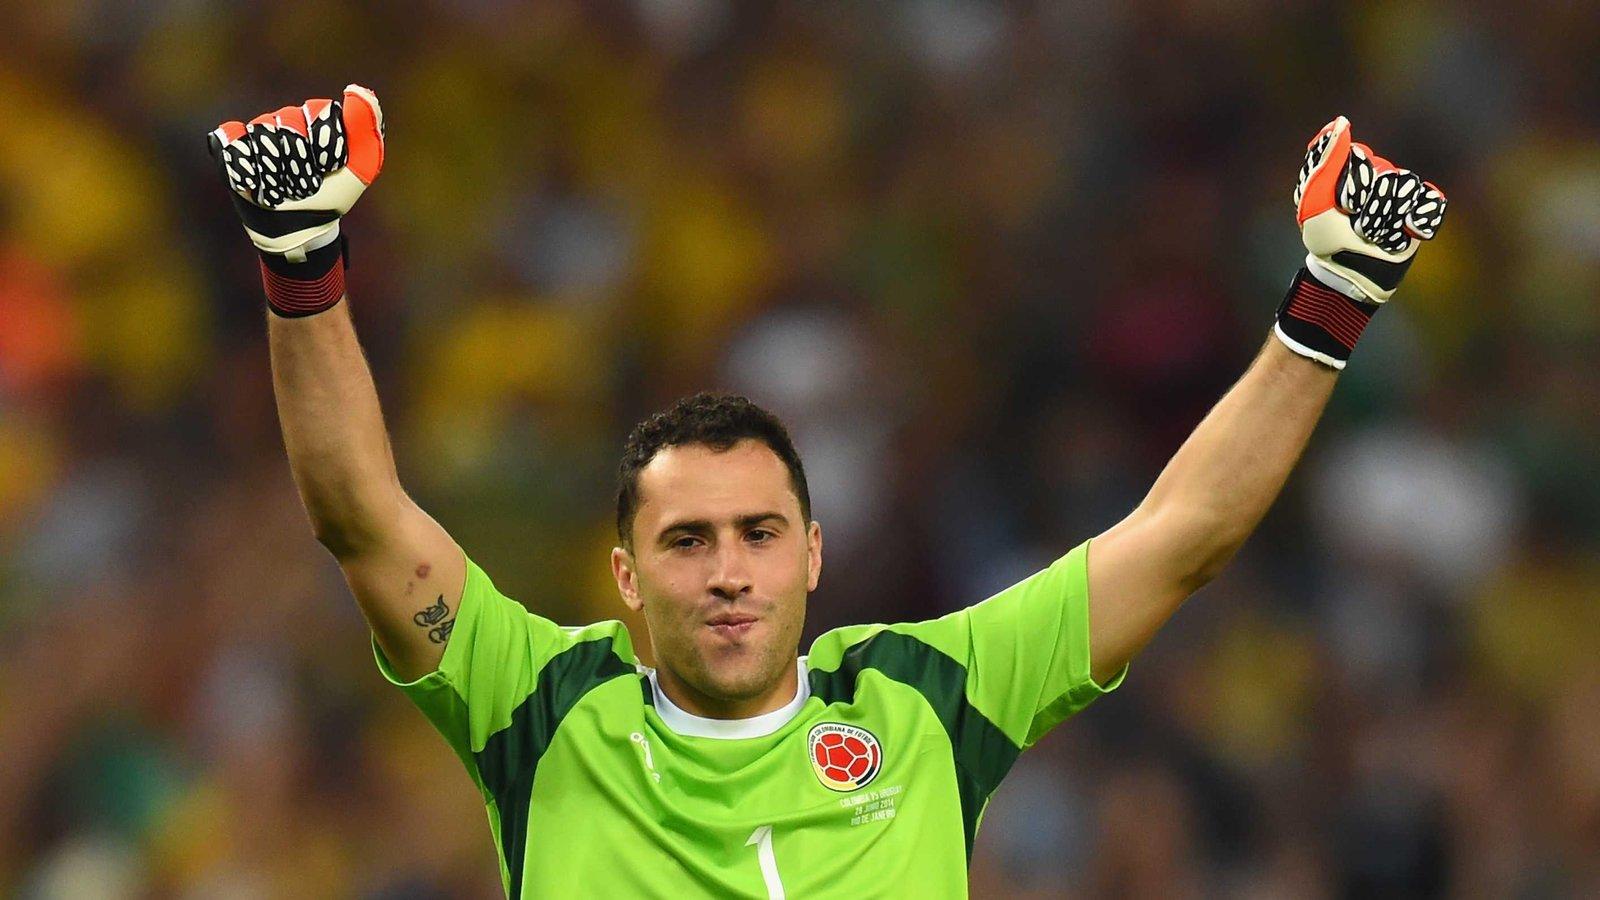 Colombia goalkeeper Ospina to join Arsenal